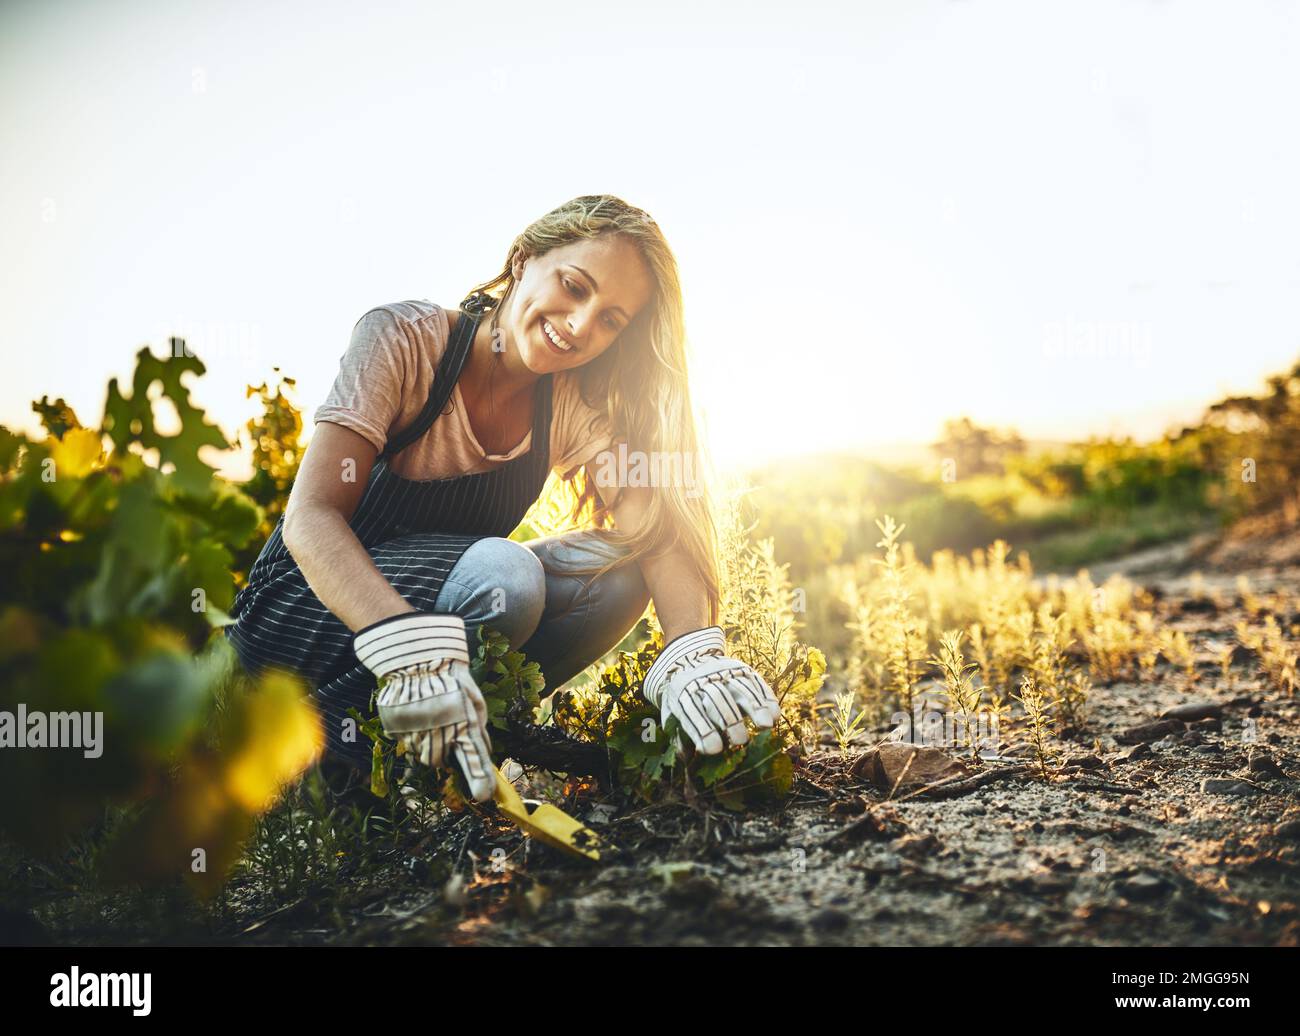 Its hard not to be happy when youre farming. a young woman tending to the crops on a farm. Stock Photo